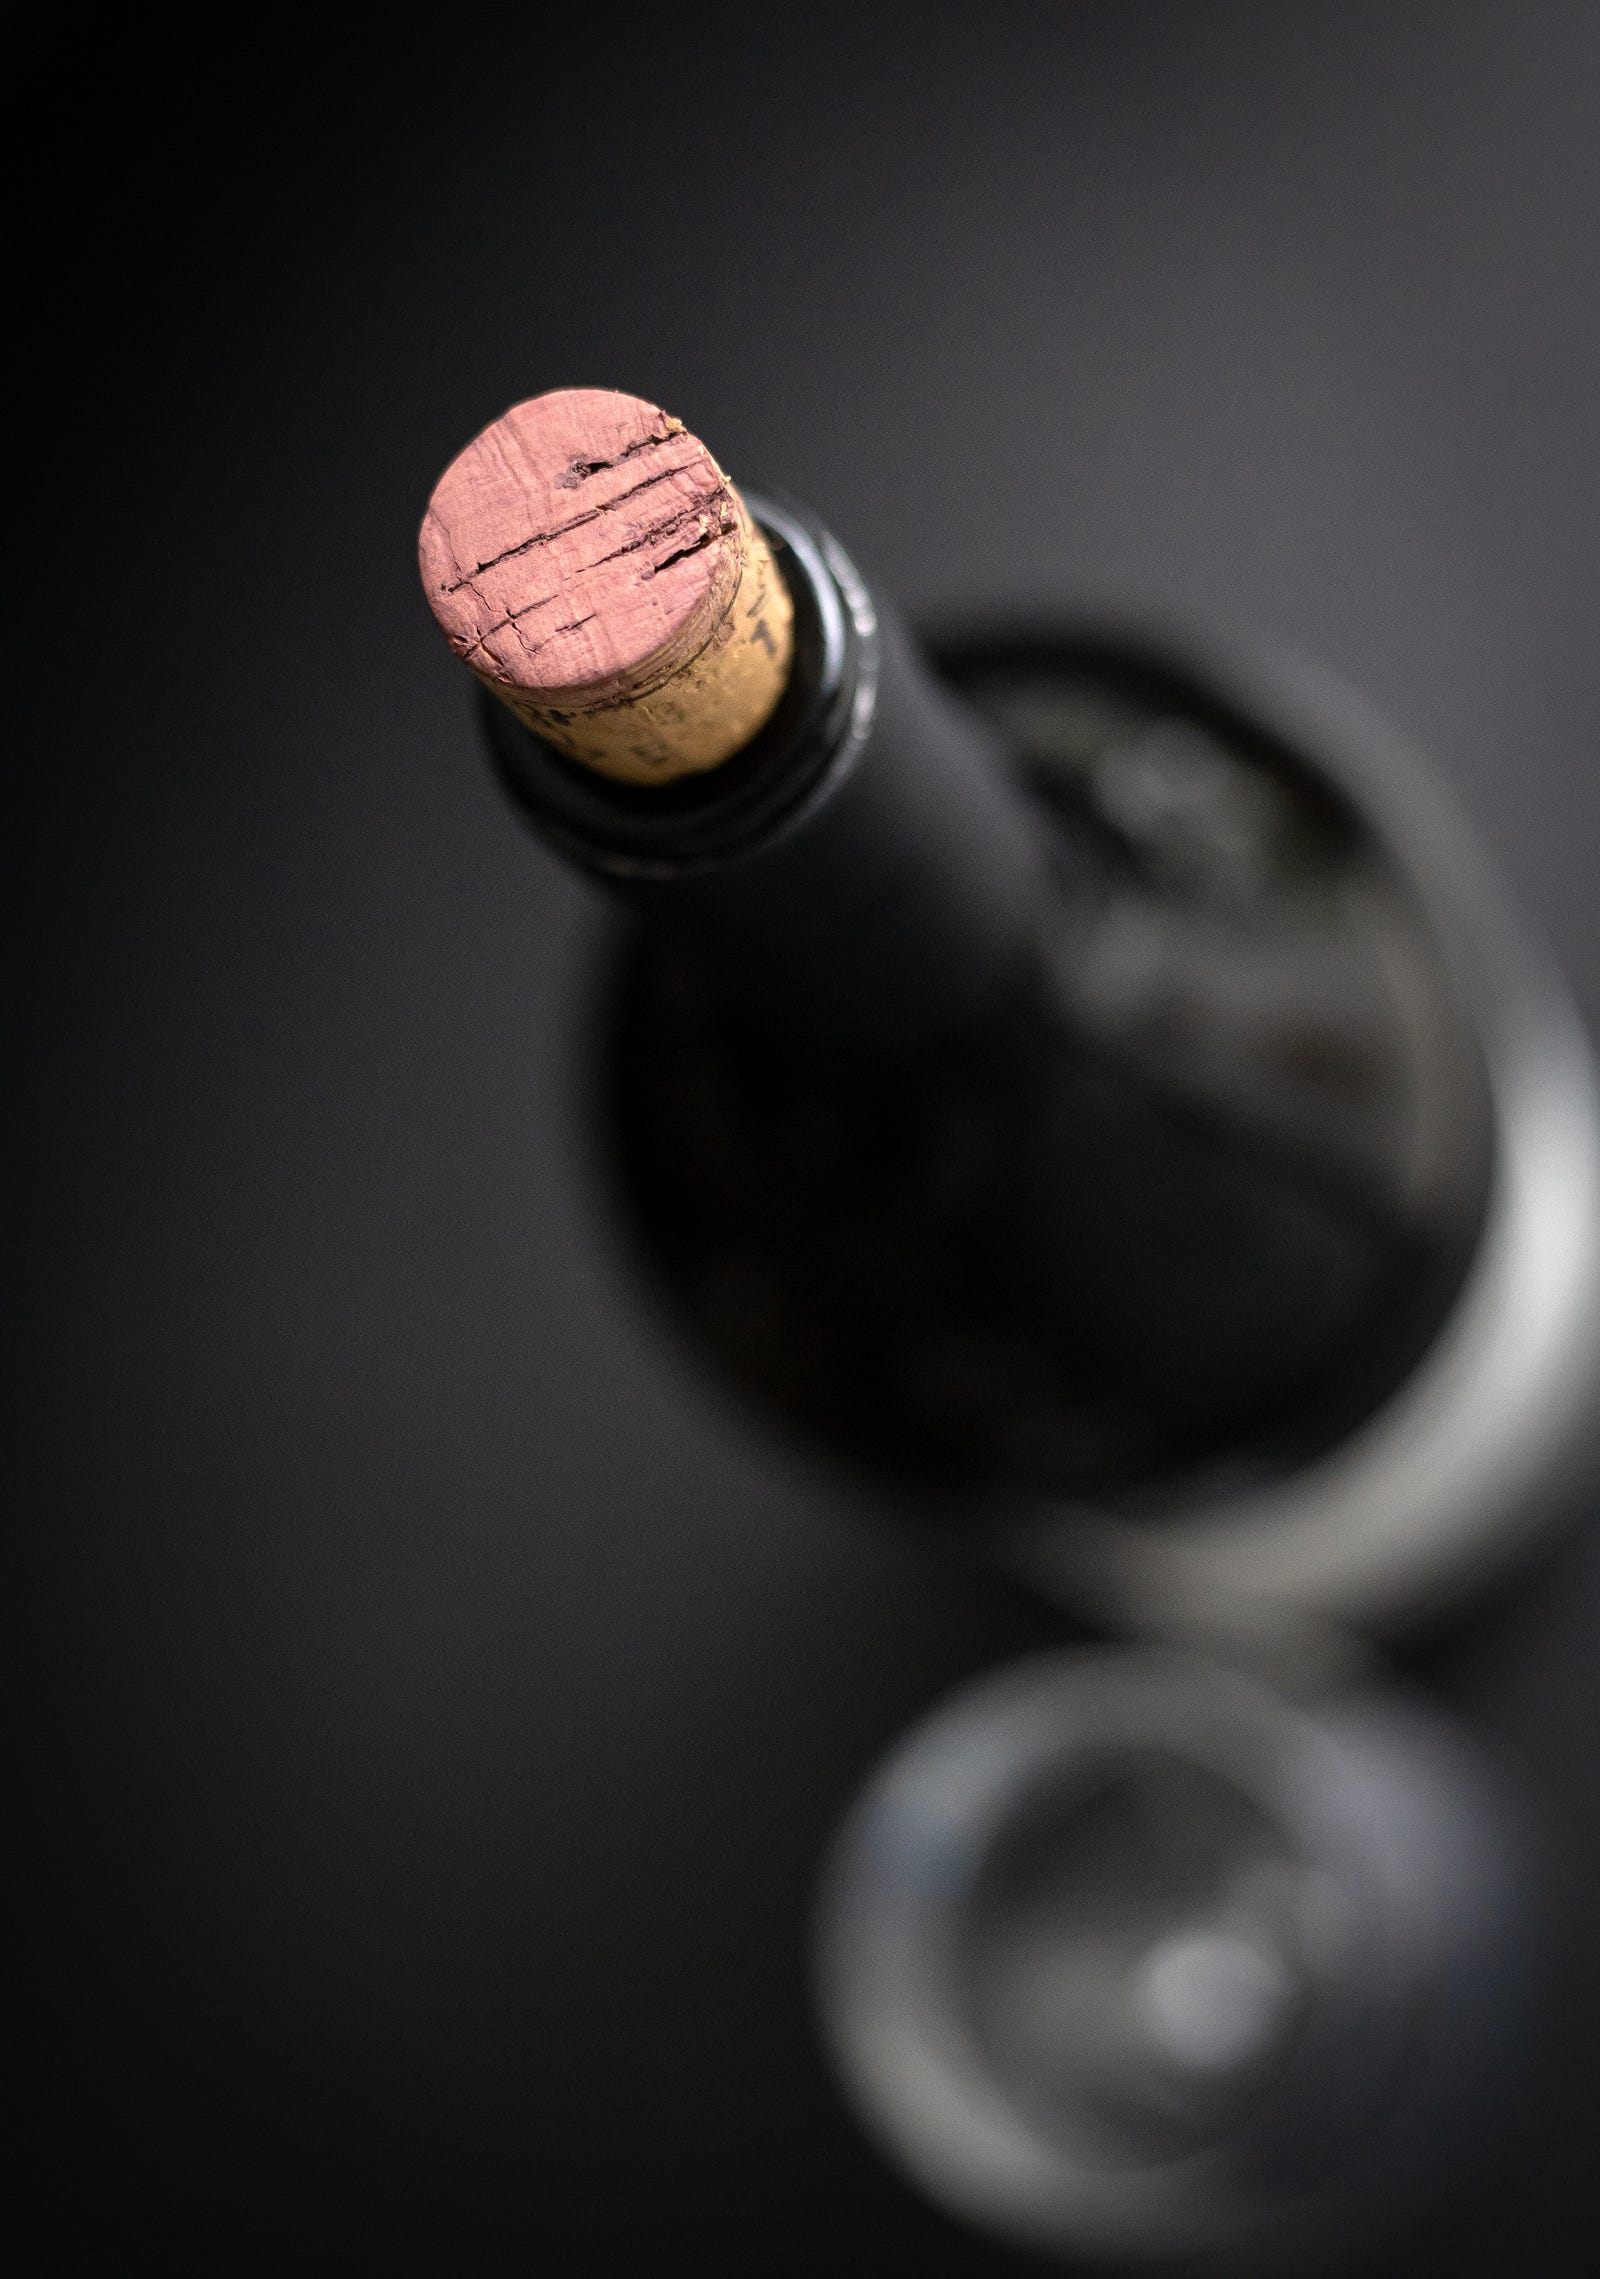 A glass of wine from above, cork in place. In its Report on Carcinogens, the National Toxicology Program of the US Department of Health and Human Services lists the consumption of alcoholic beverages as a known human cancer-causing agent.